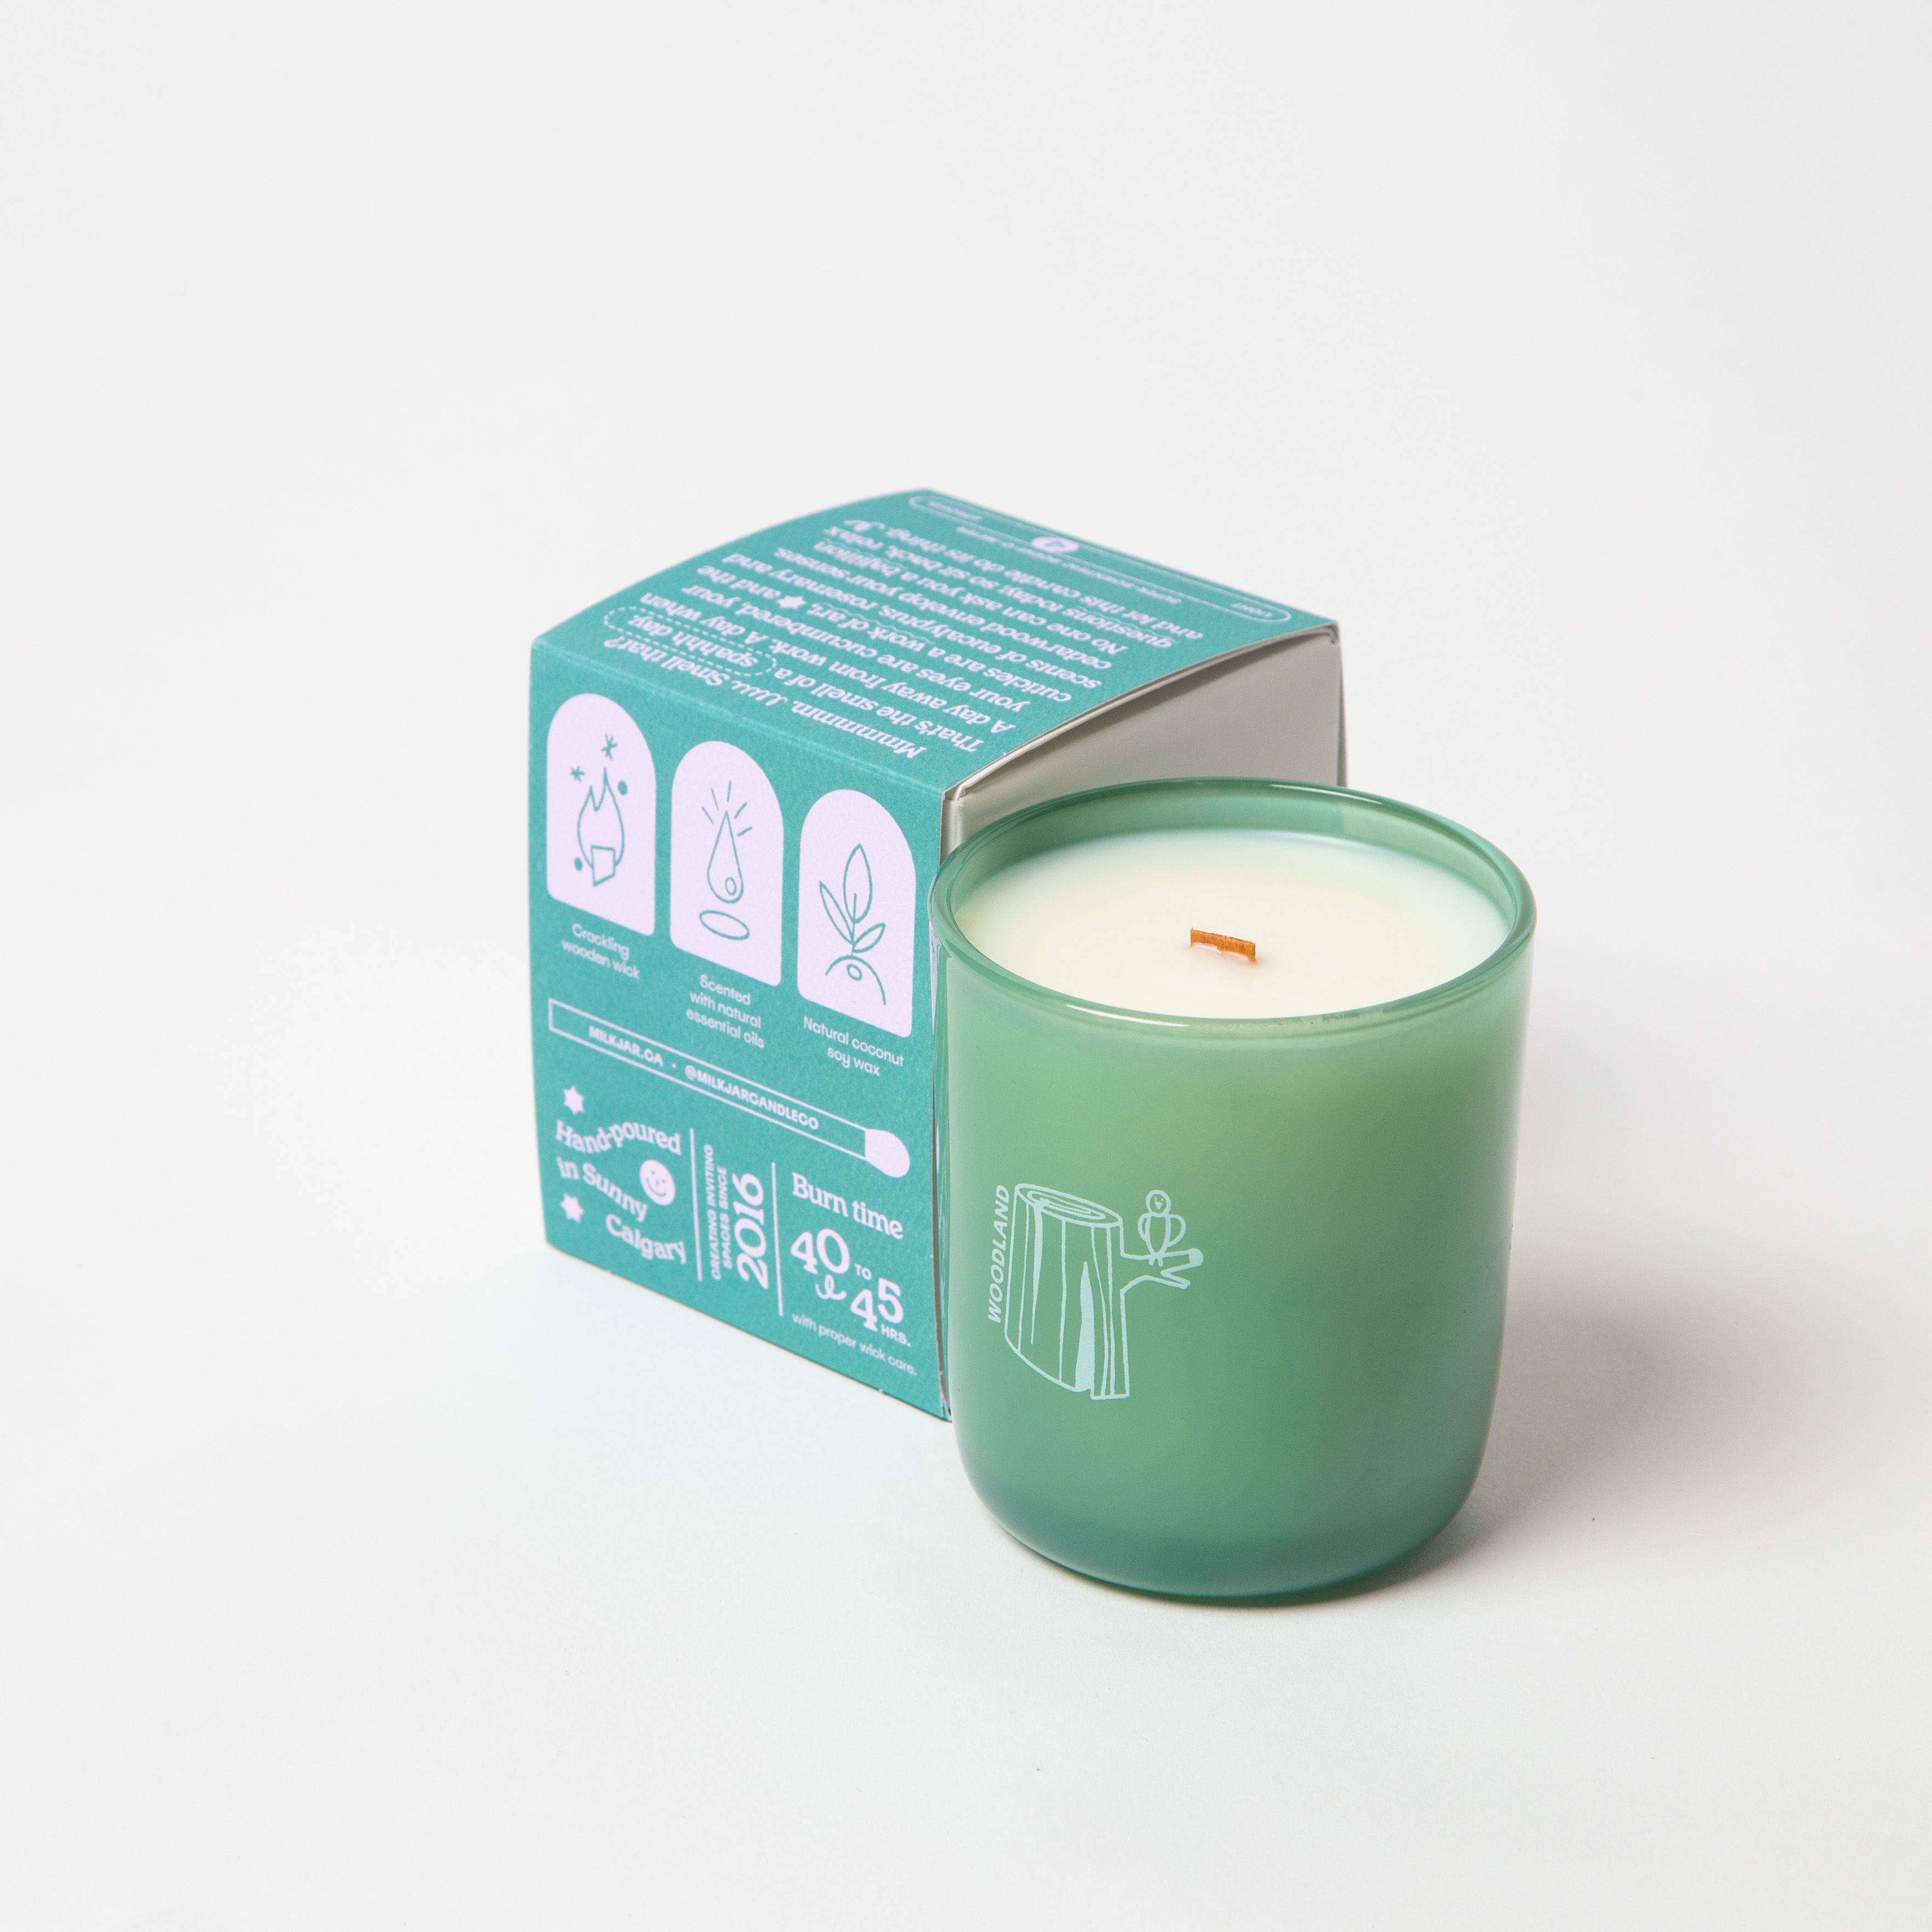 woodland essential oil candle by milk jar candle co.